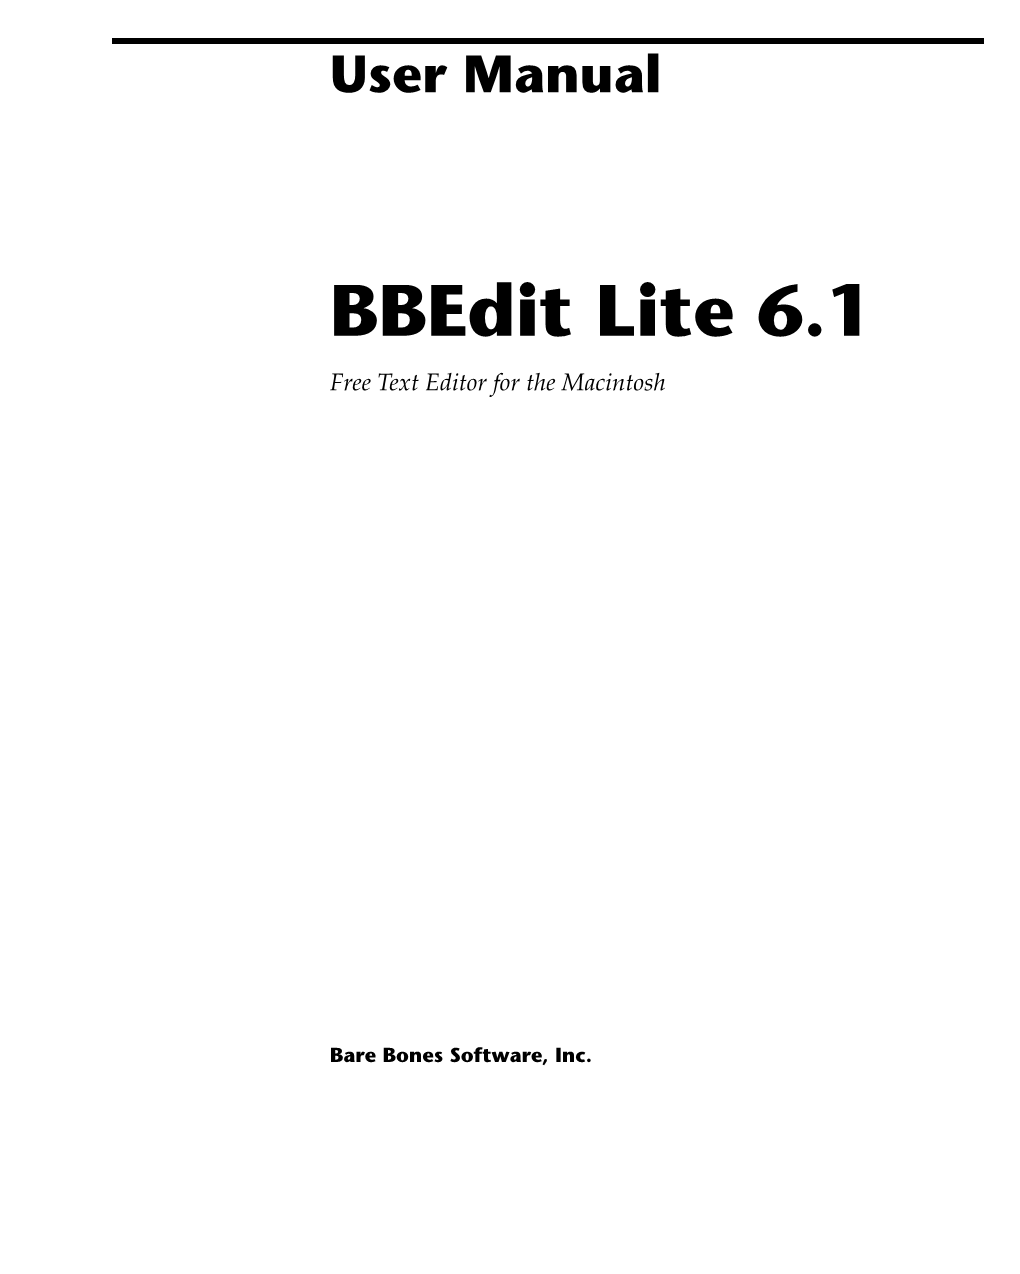 What Is Bbedit Lite?